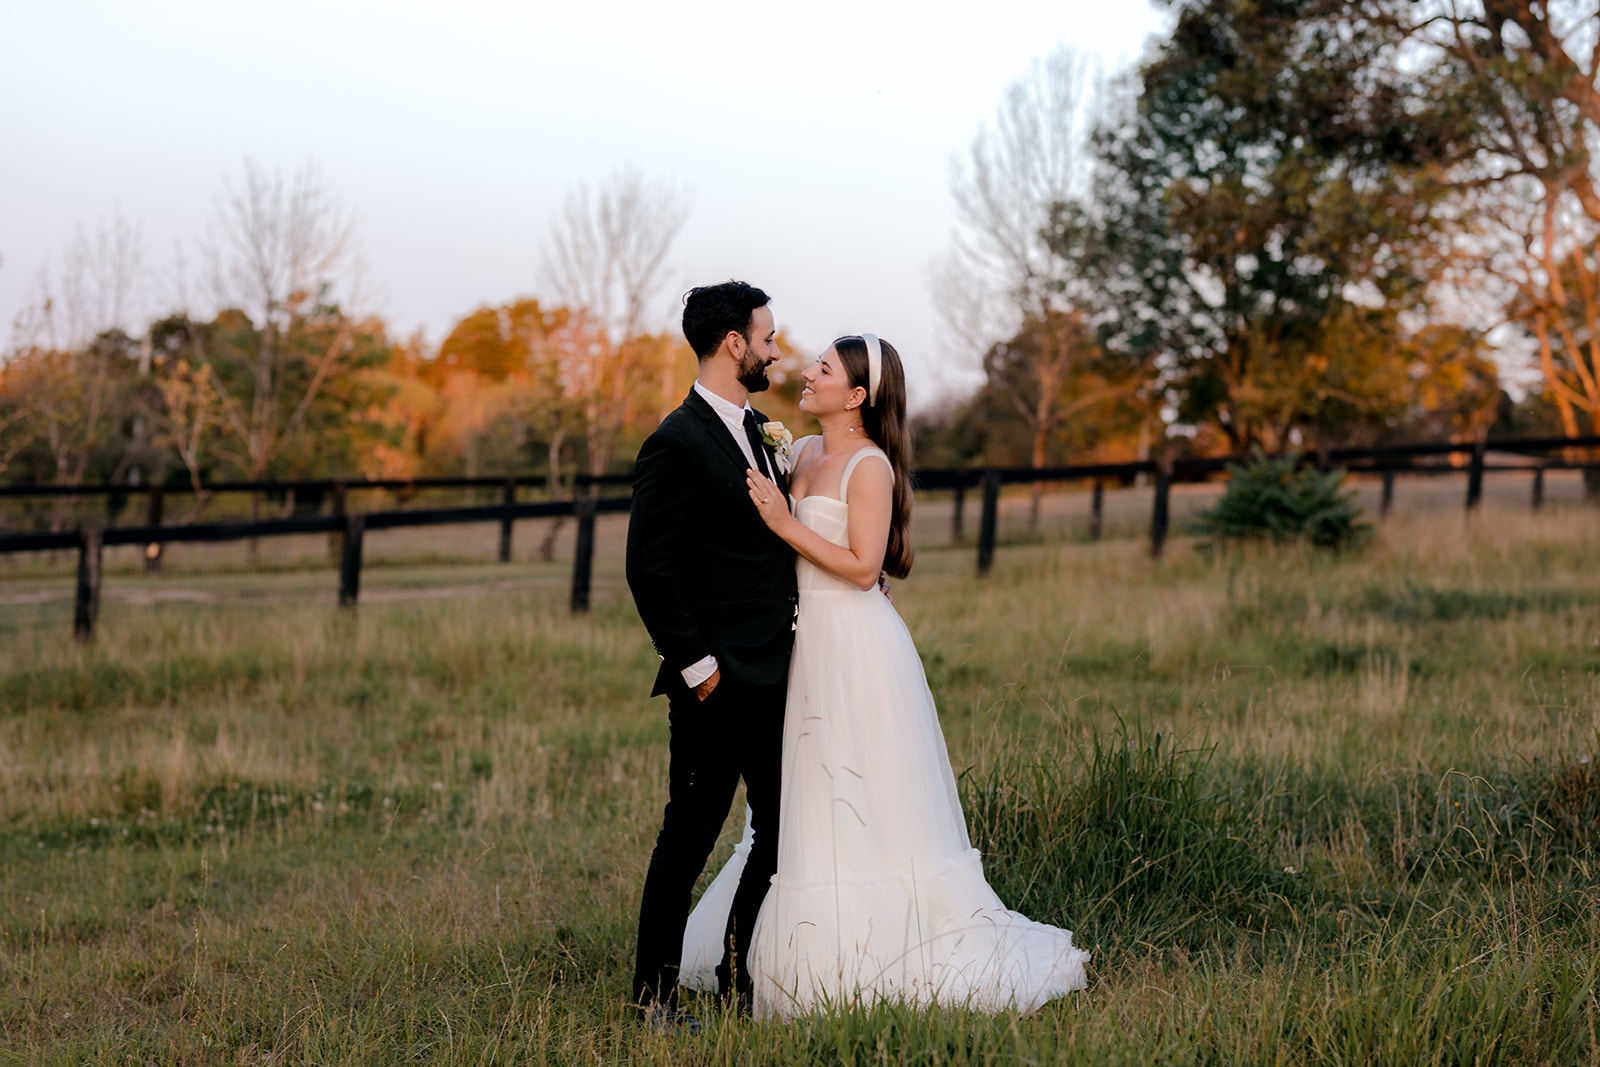 Portrait of bride & groom at sunset during their elegant country wedding.